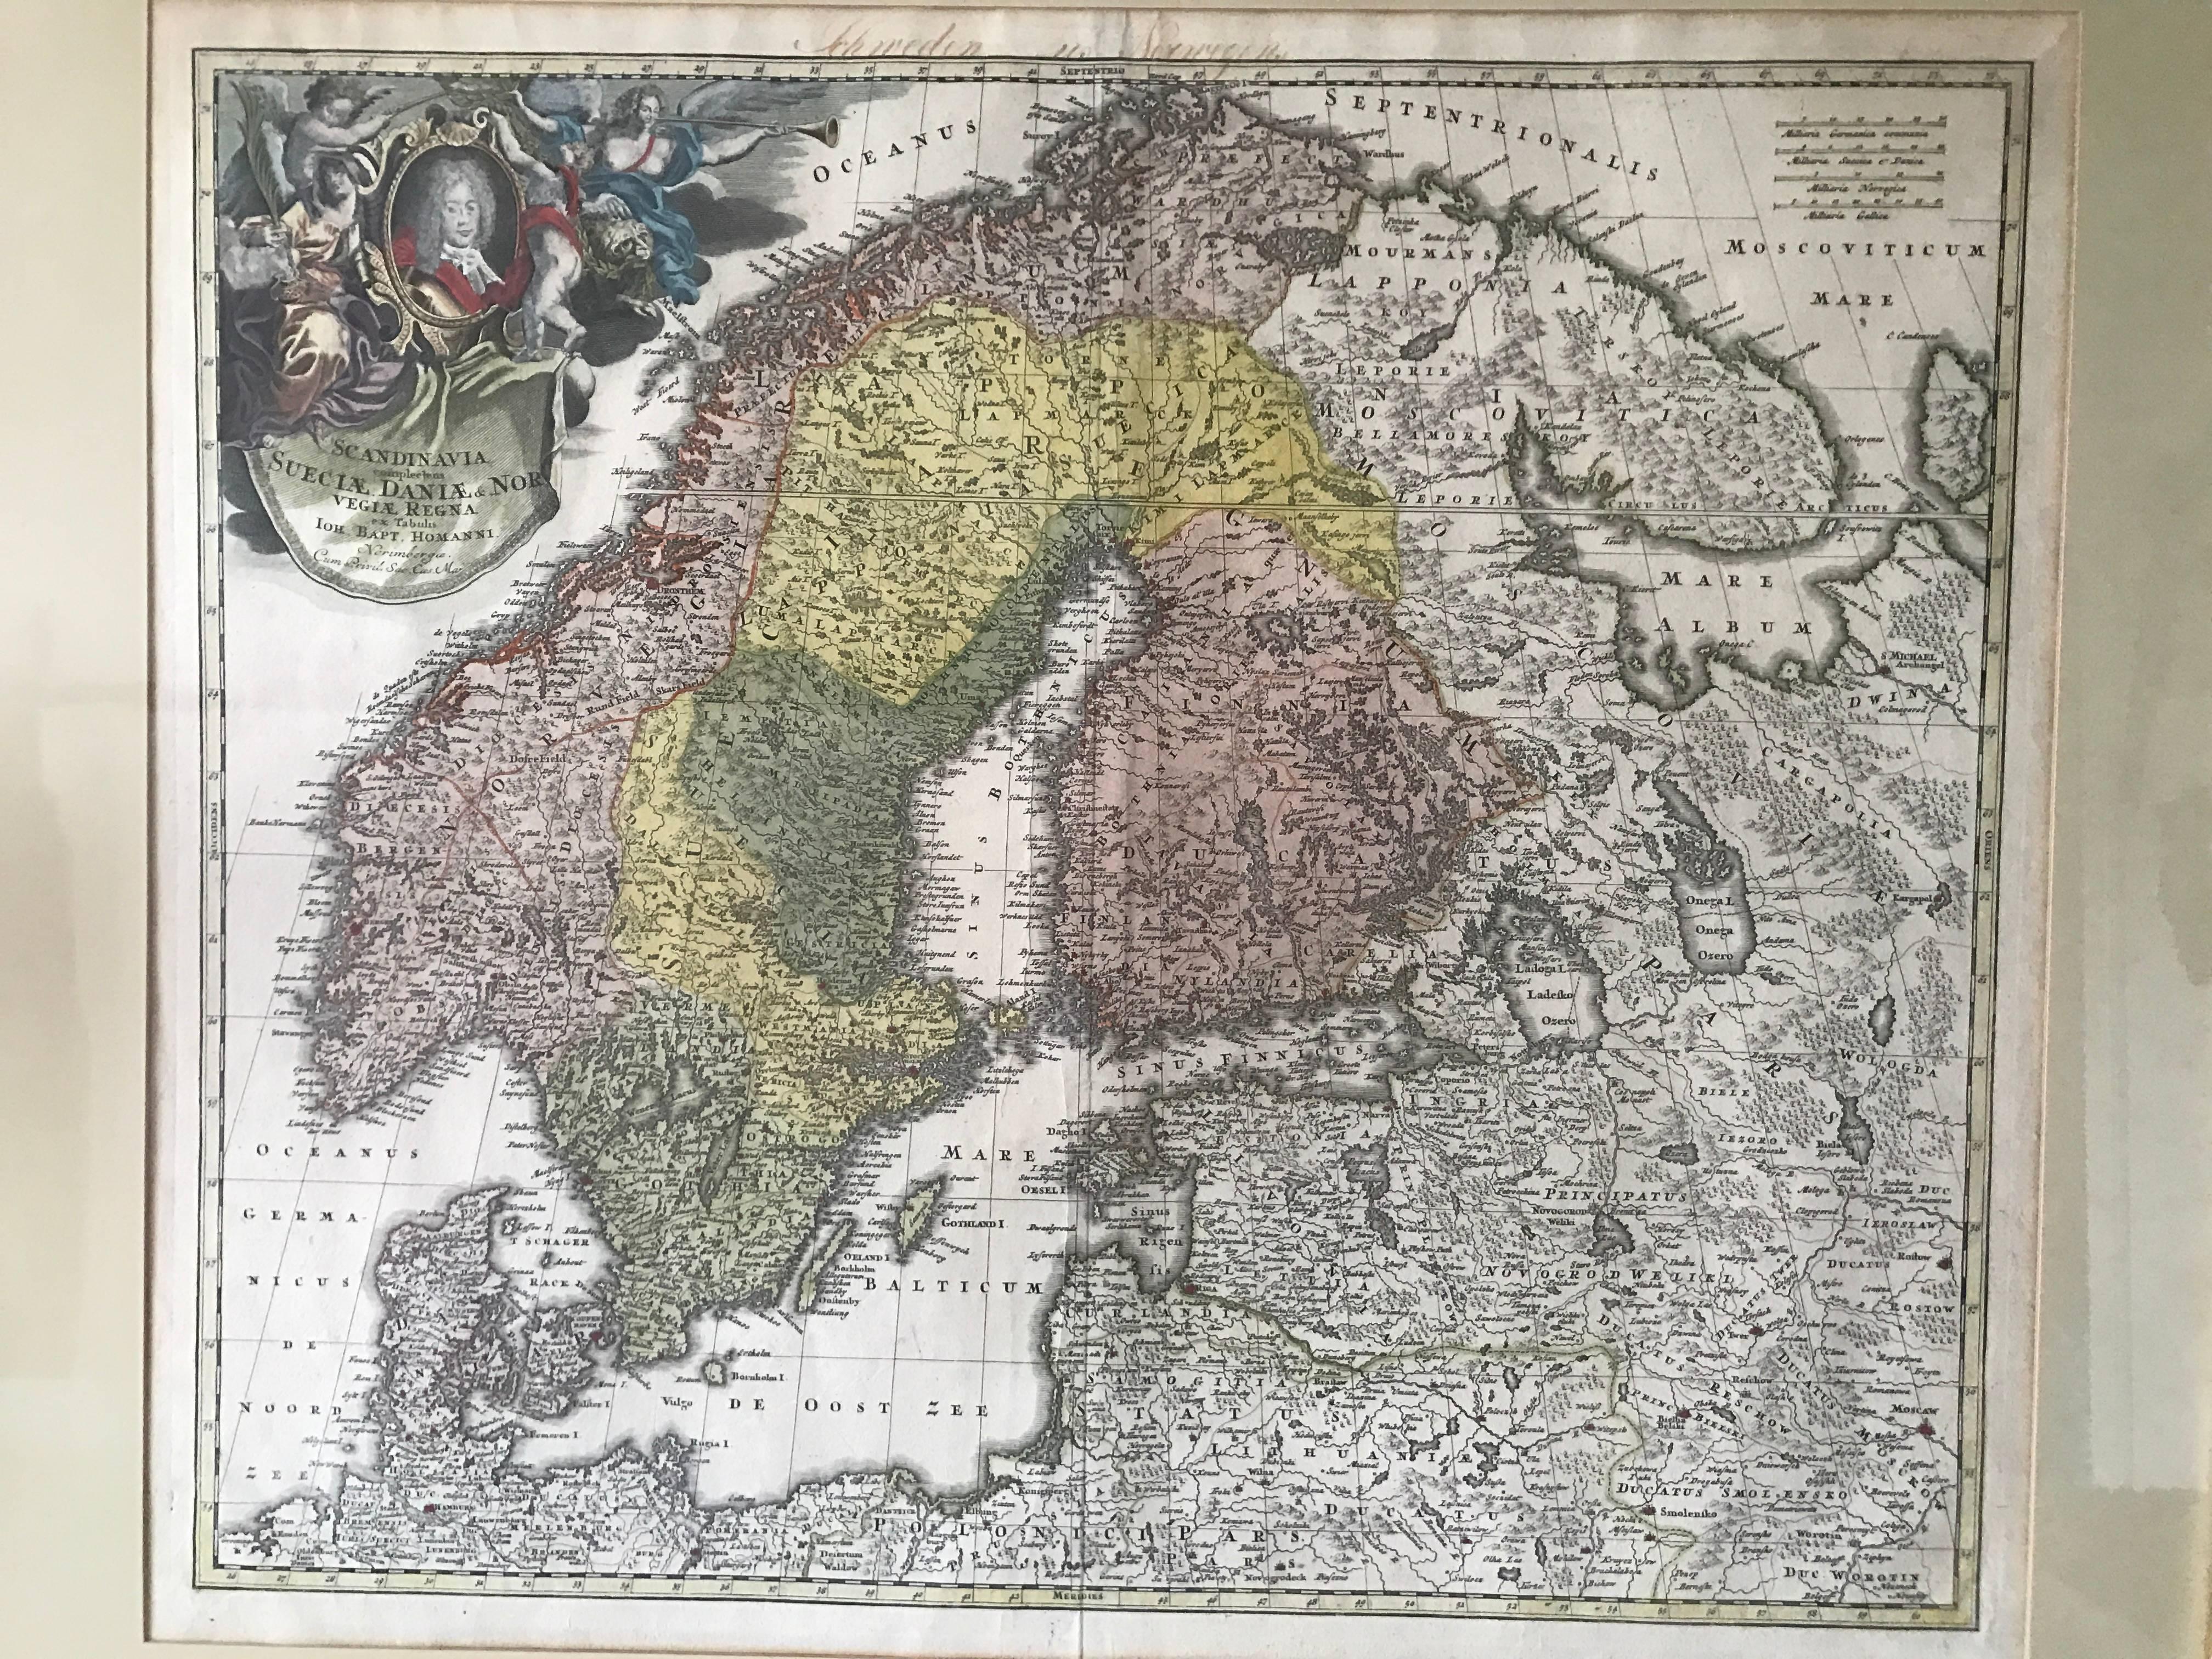 A beautifully detailed circa 1735 J. B. Homann map of Scandinavia. "Scandinavia compectens Sueciae, Dania, Norwegiae Regna" 
The map depicts both Denmark, Norway, Sweden, Finland and the Baltic states of Livonia, Latvia and Curlandia. The